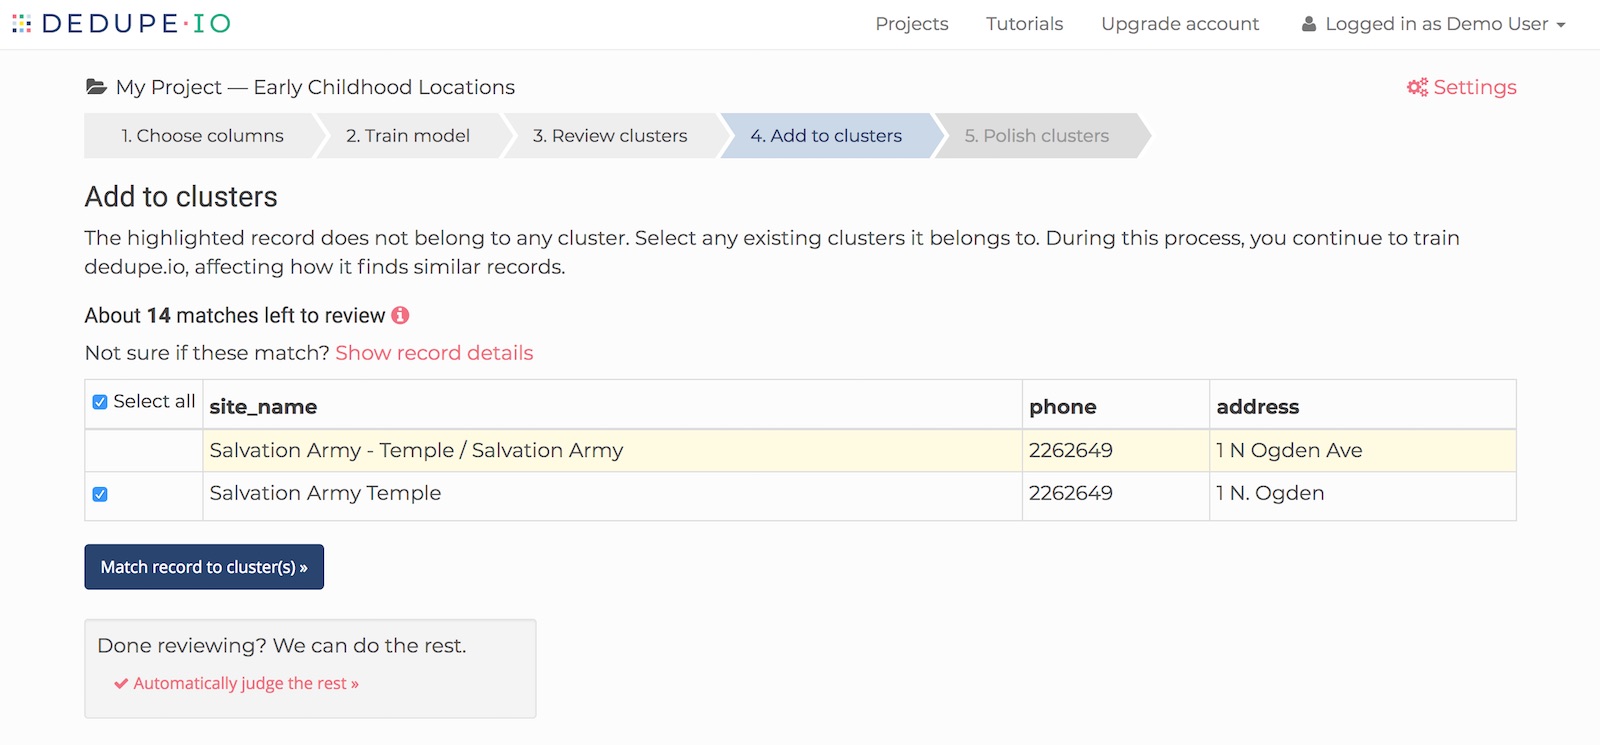 Matching records to clusters on Dedupe.io